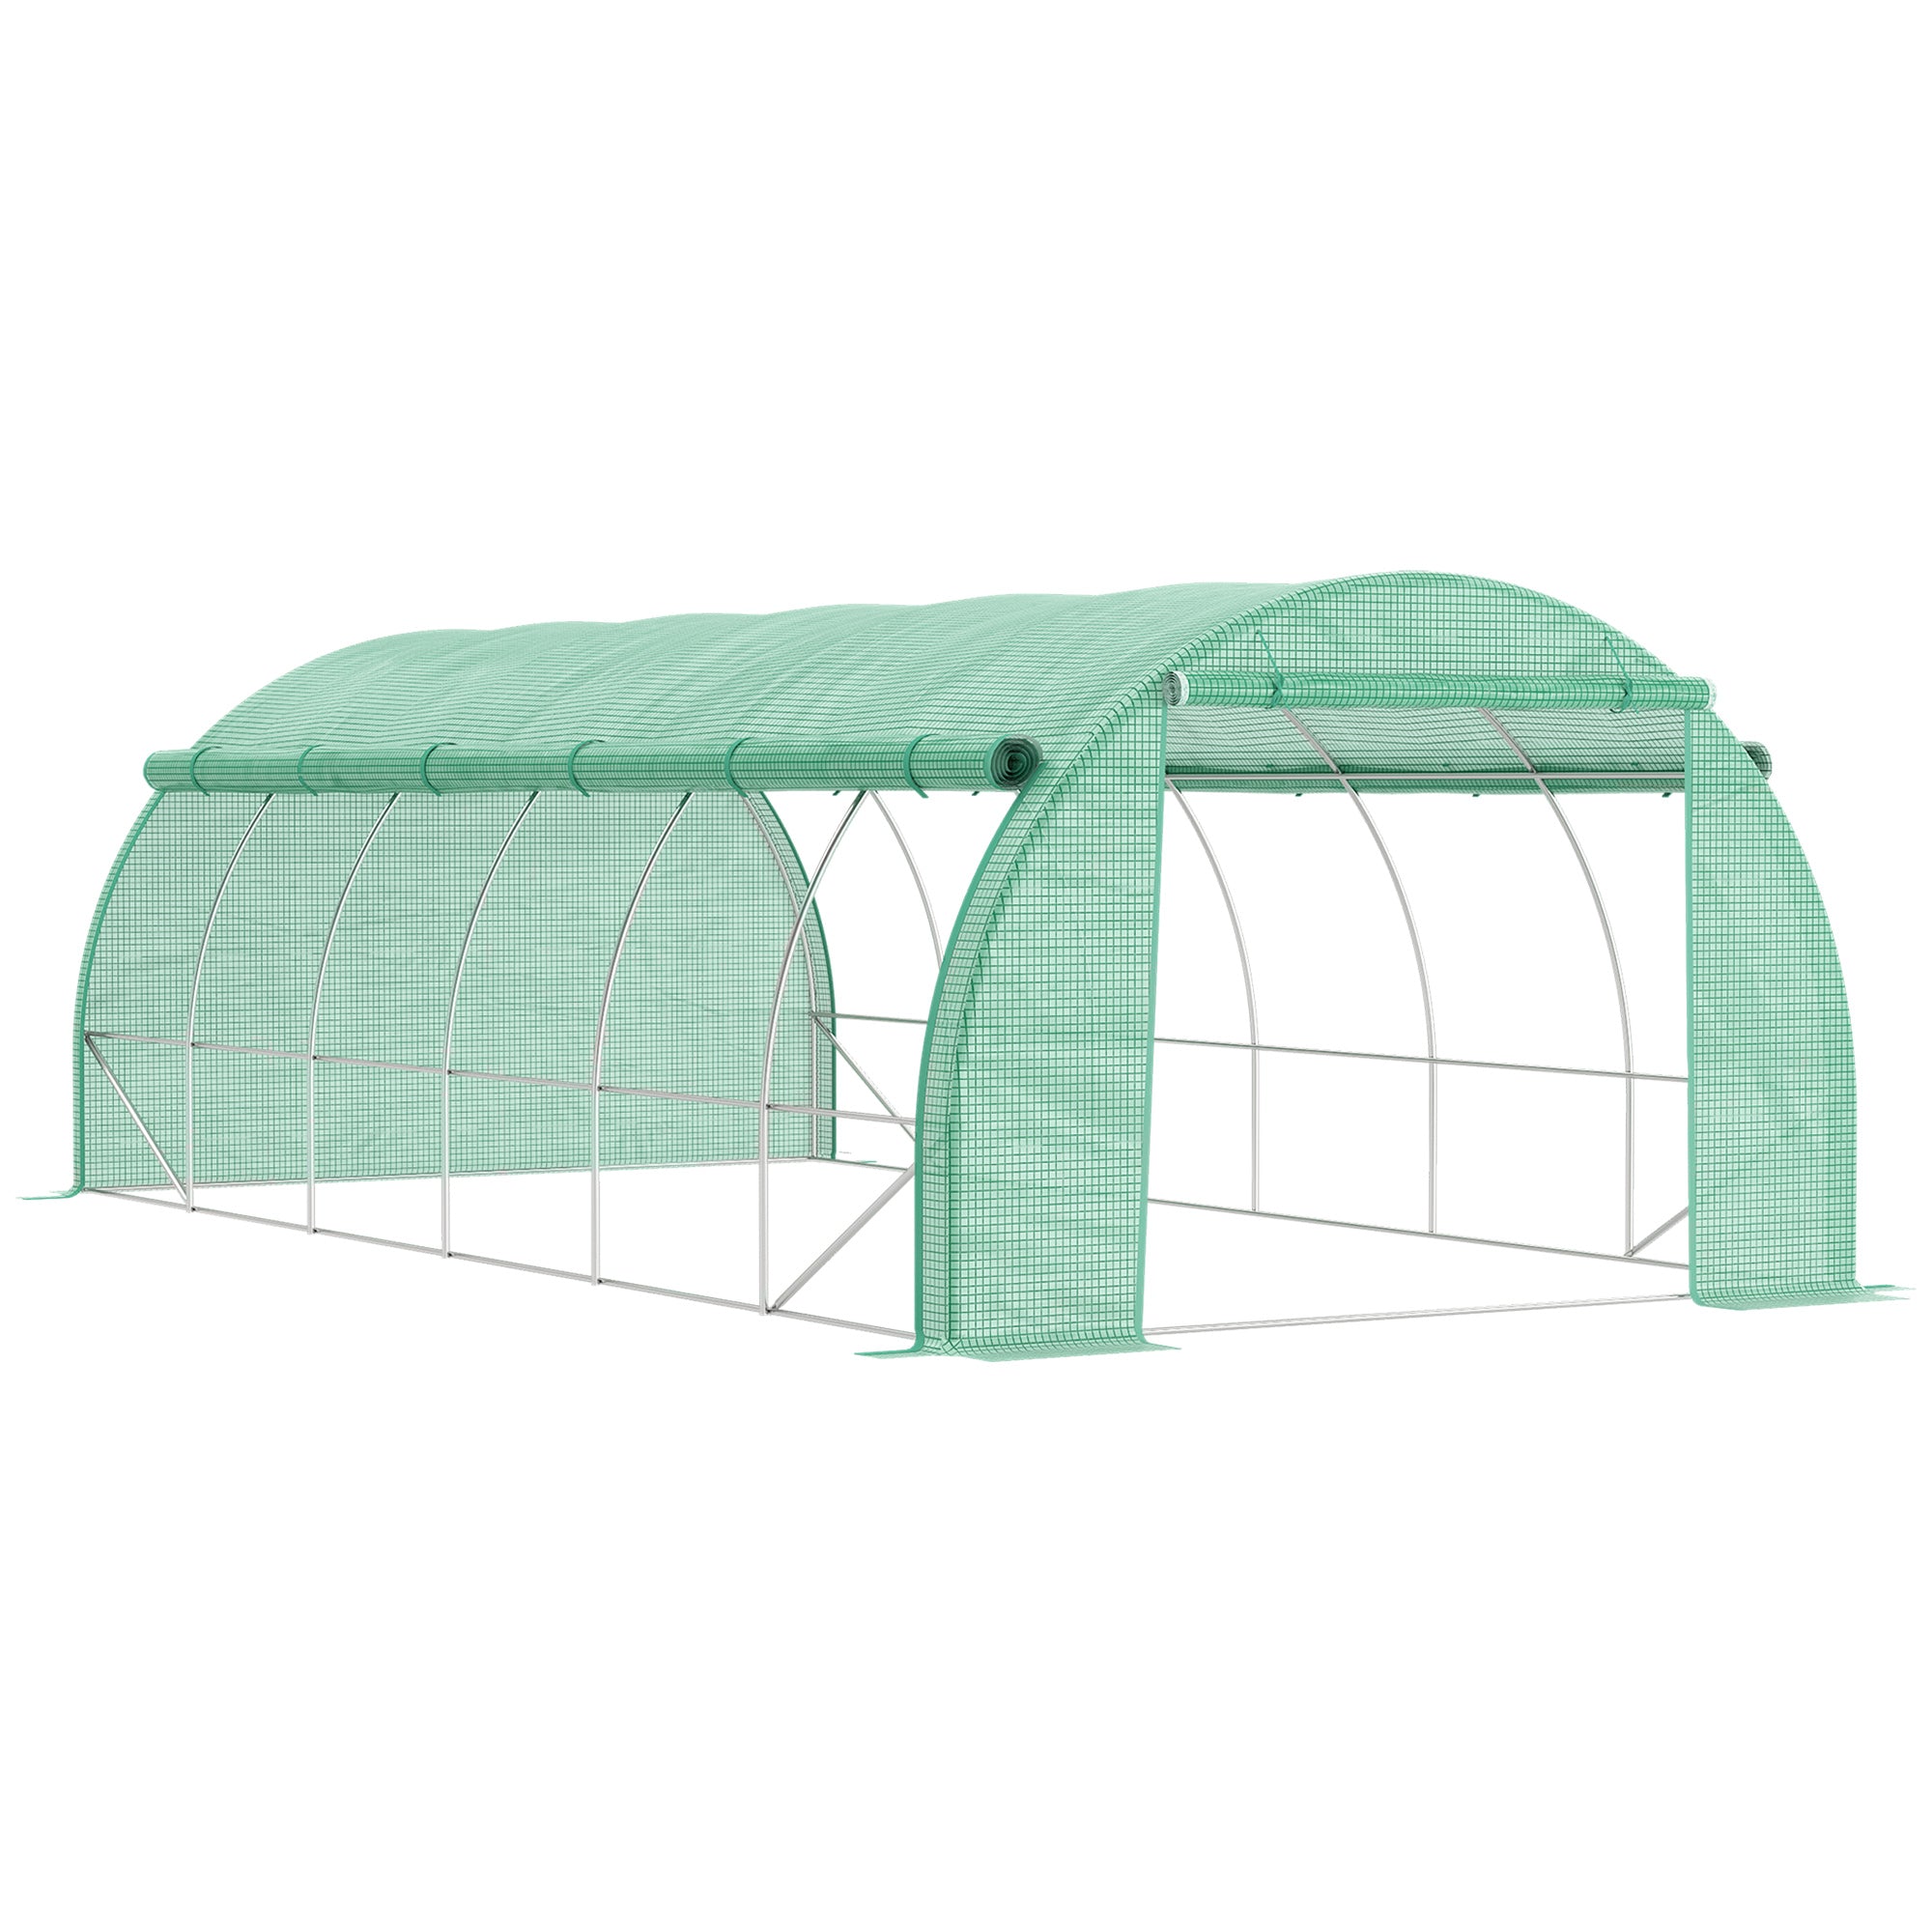 Outsunny 6 x 3 x 2 m Polytunnel Greenhouse Pollytunnel Tent Steel Frame Green  | TJ Hughes